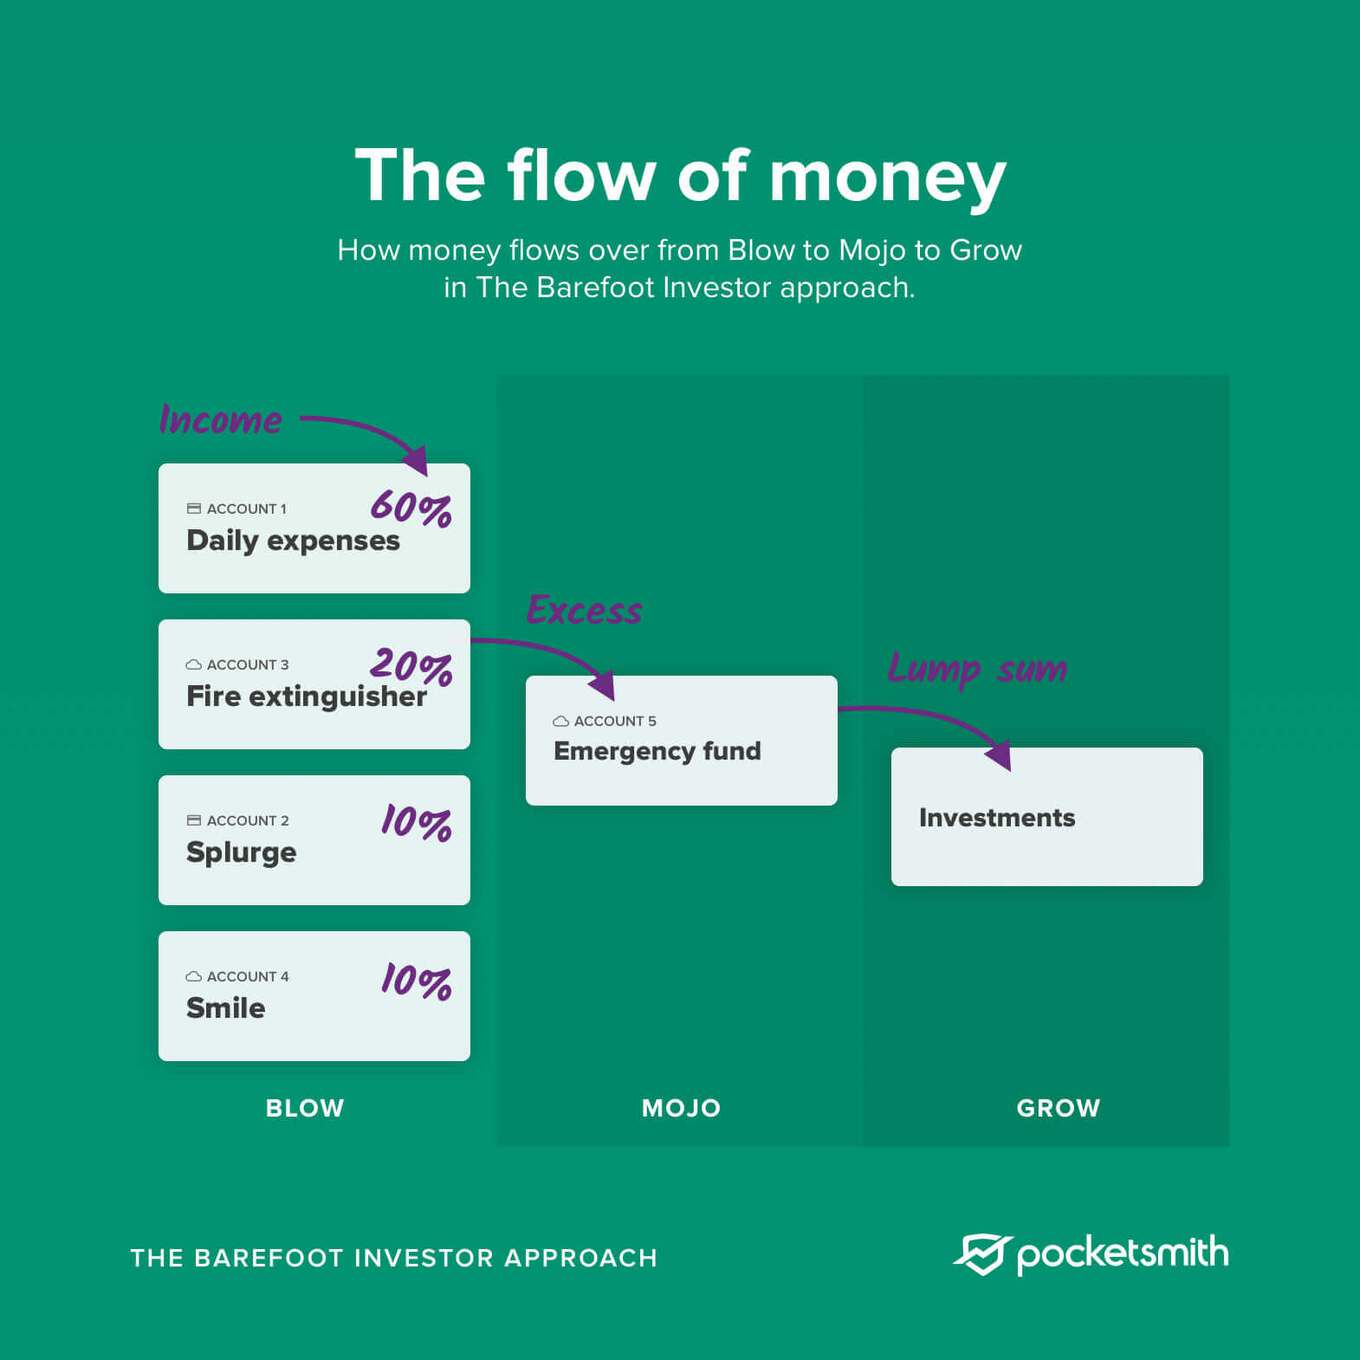 A diagram showing how money flows through the Blow bucket to the Mojo and Grow buckets in the Barefoot Investor approach